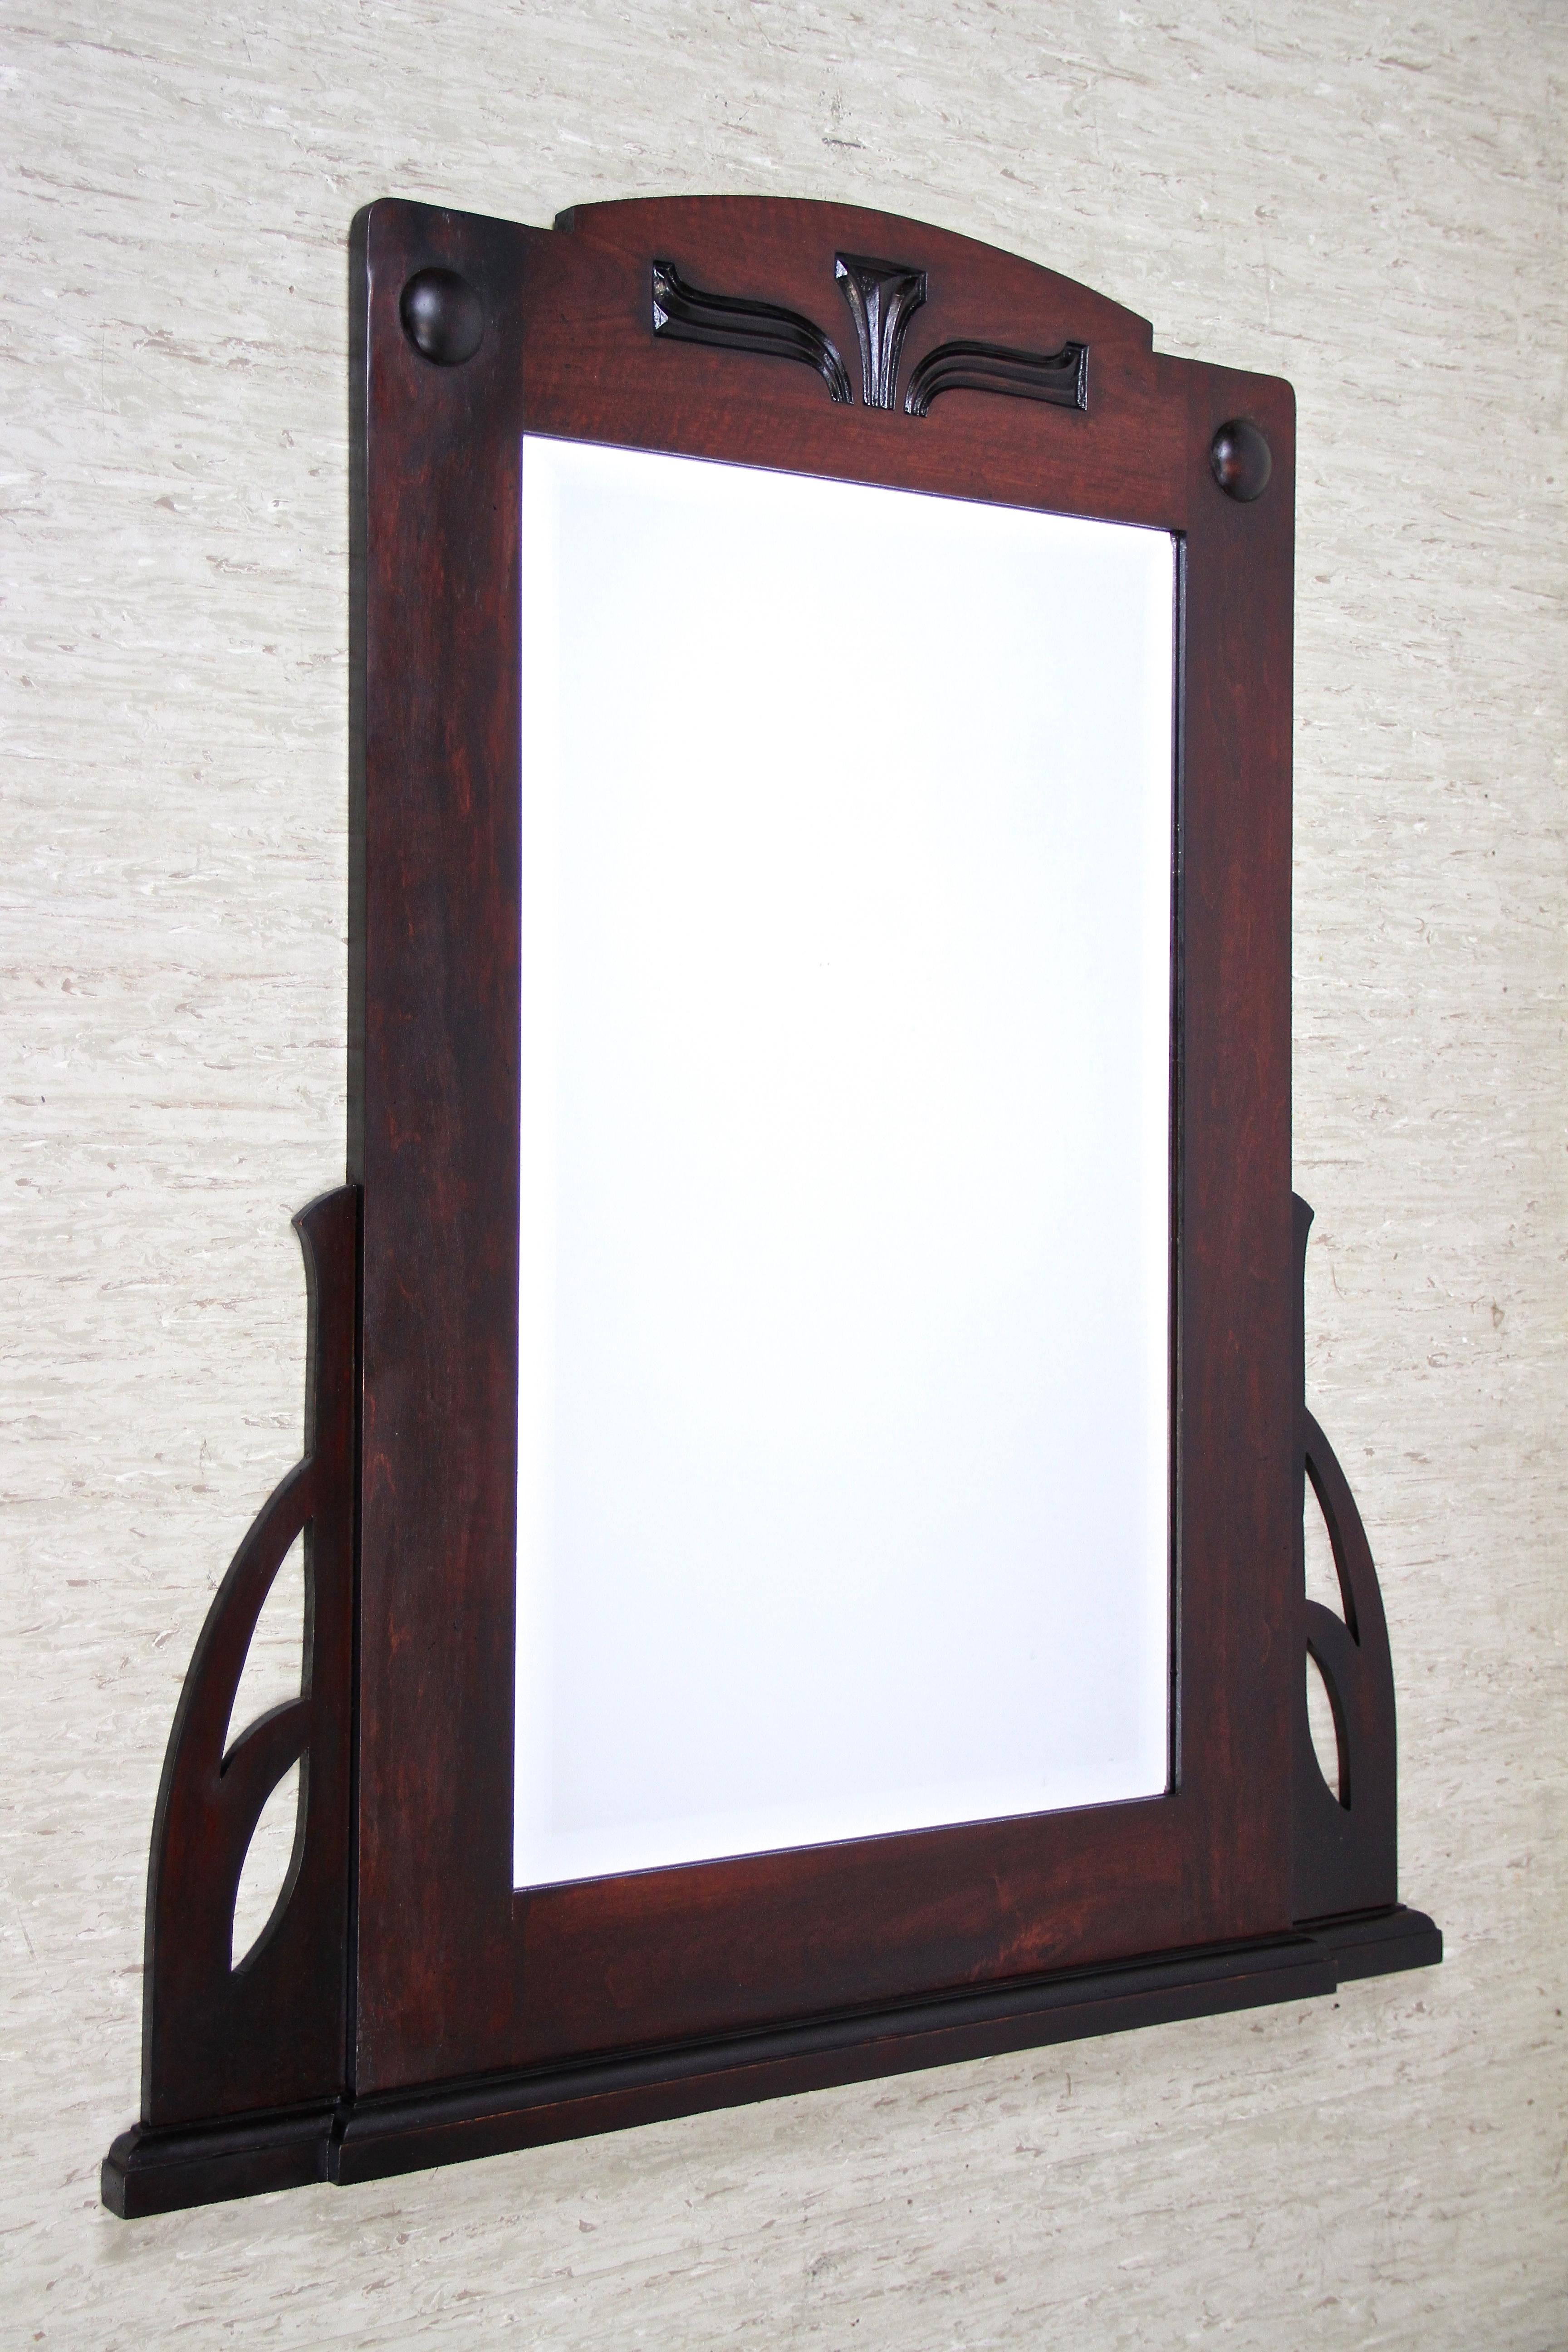 Large wooden Art Nouveau wall mirror with facet cut mirror from the period in Austria around 1905. This fantastic early 20th century mirror shows best the classical design language of this renown era. Trimmed to a very dark mahogany look, the over